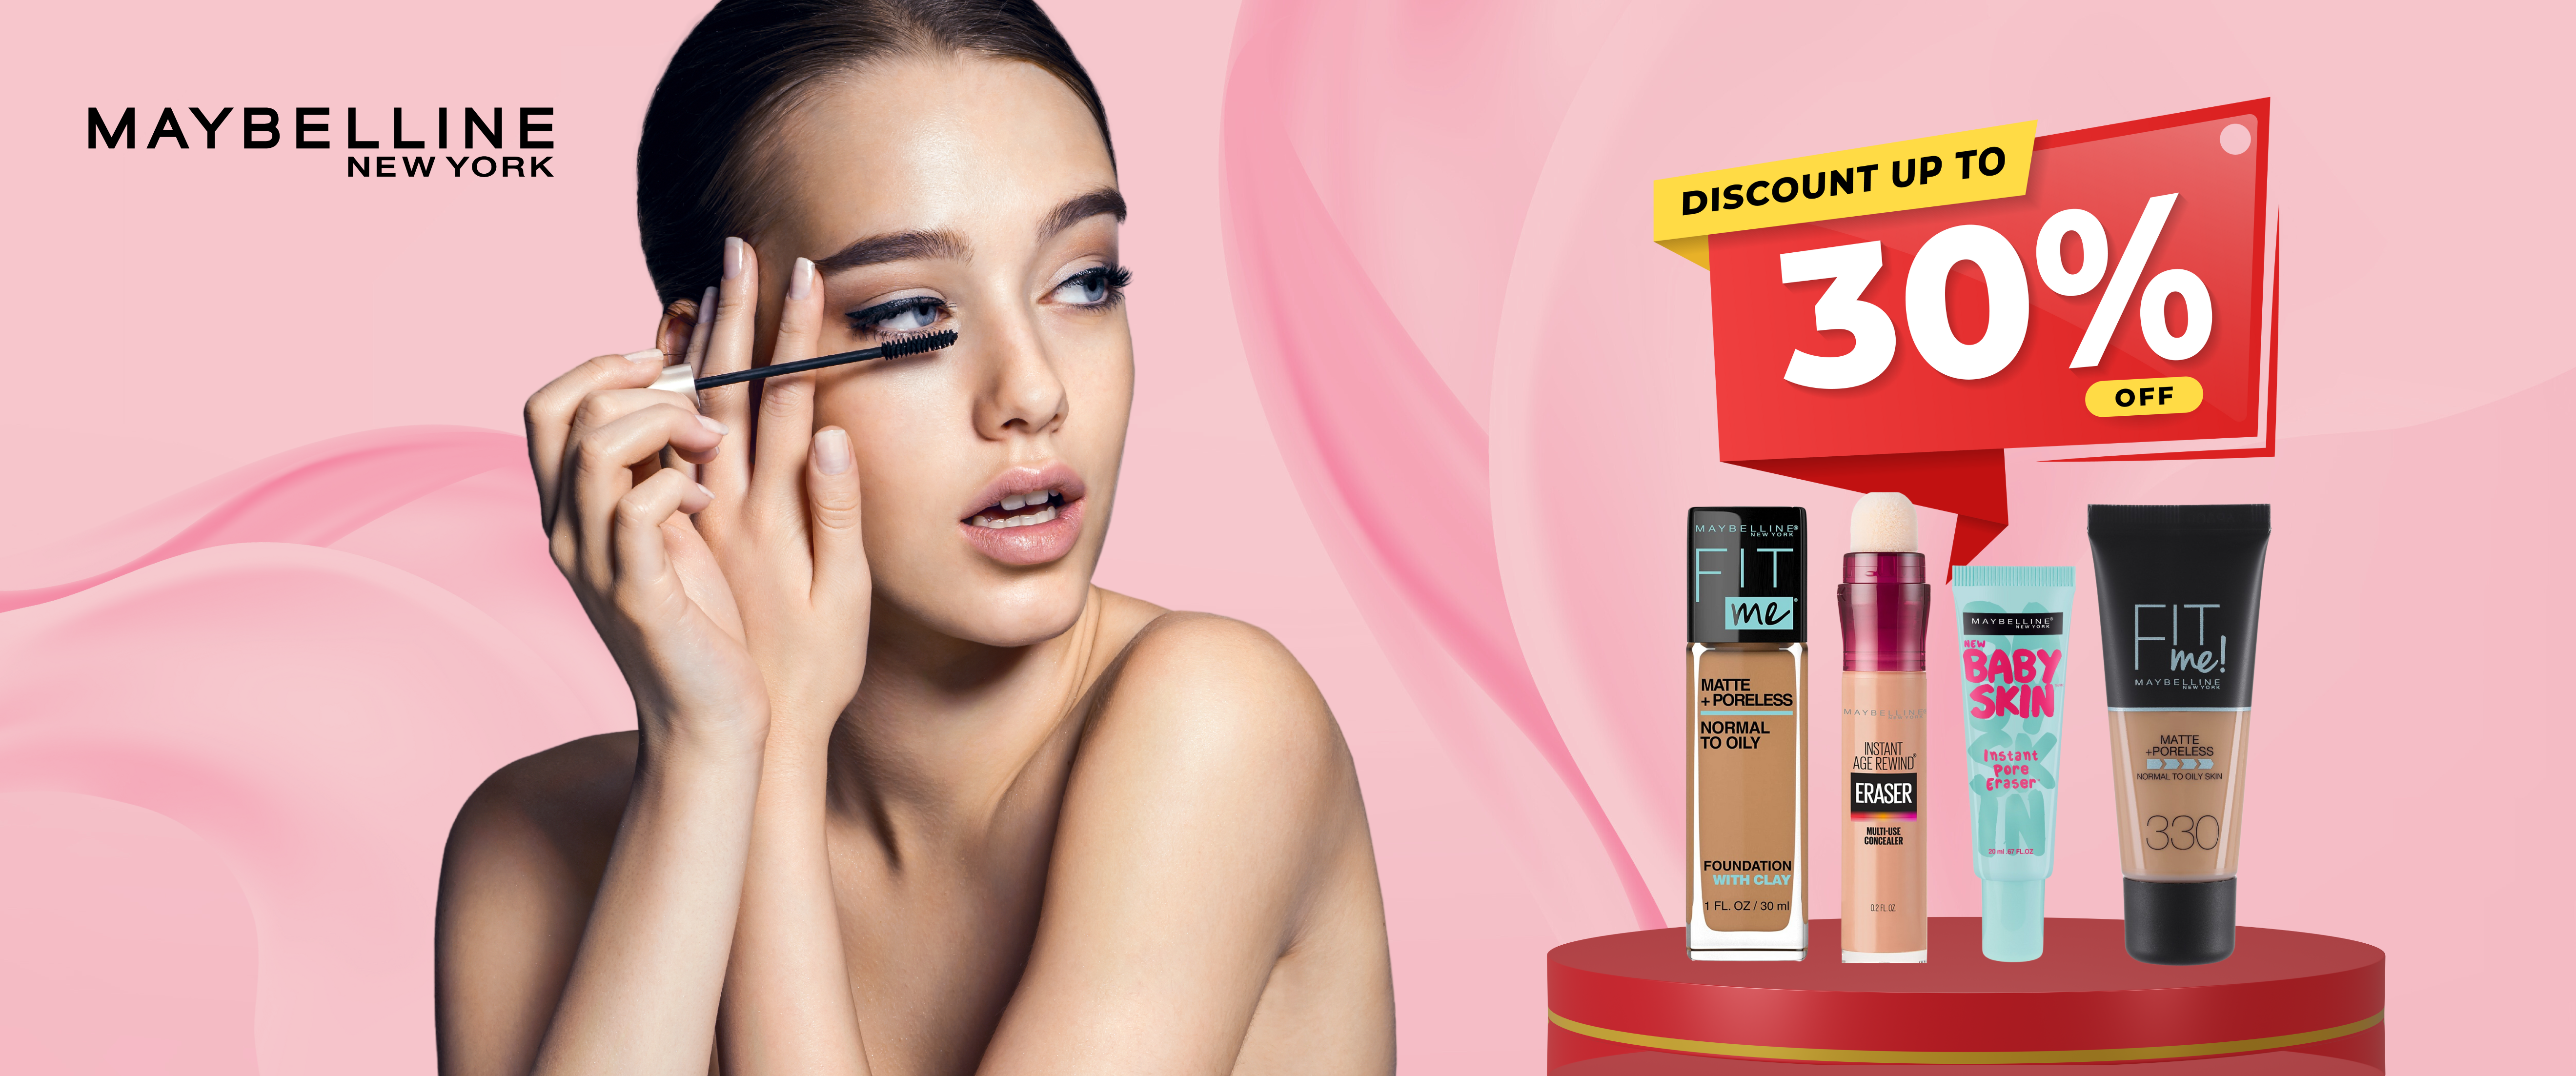 Maybelline CHS Offer